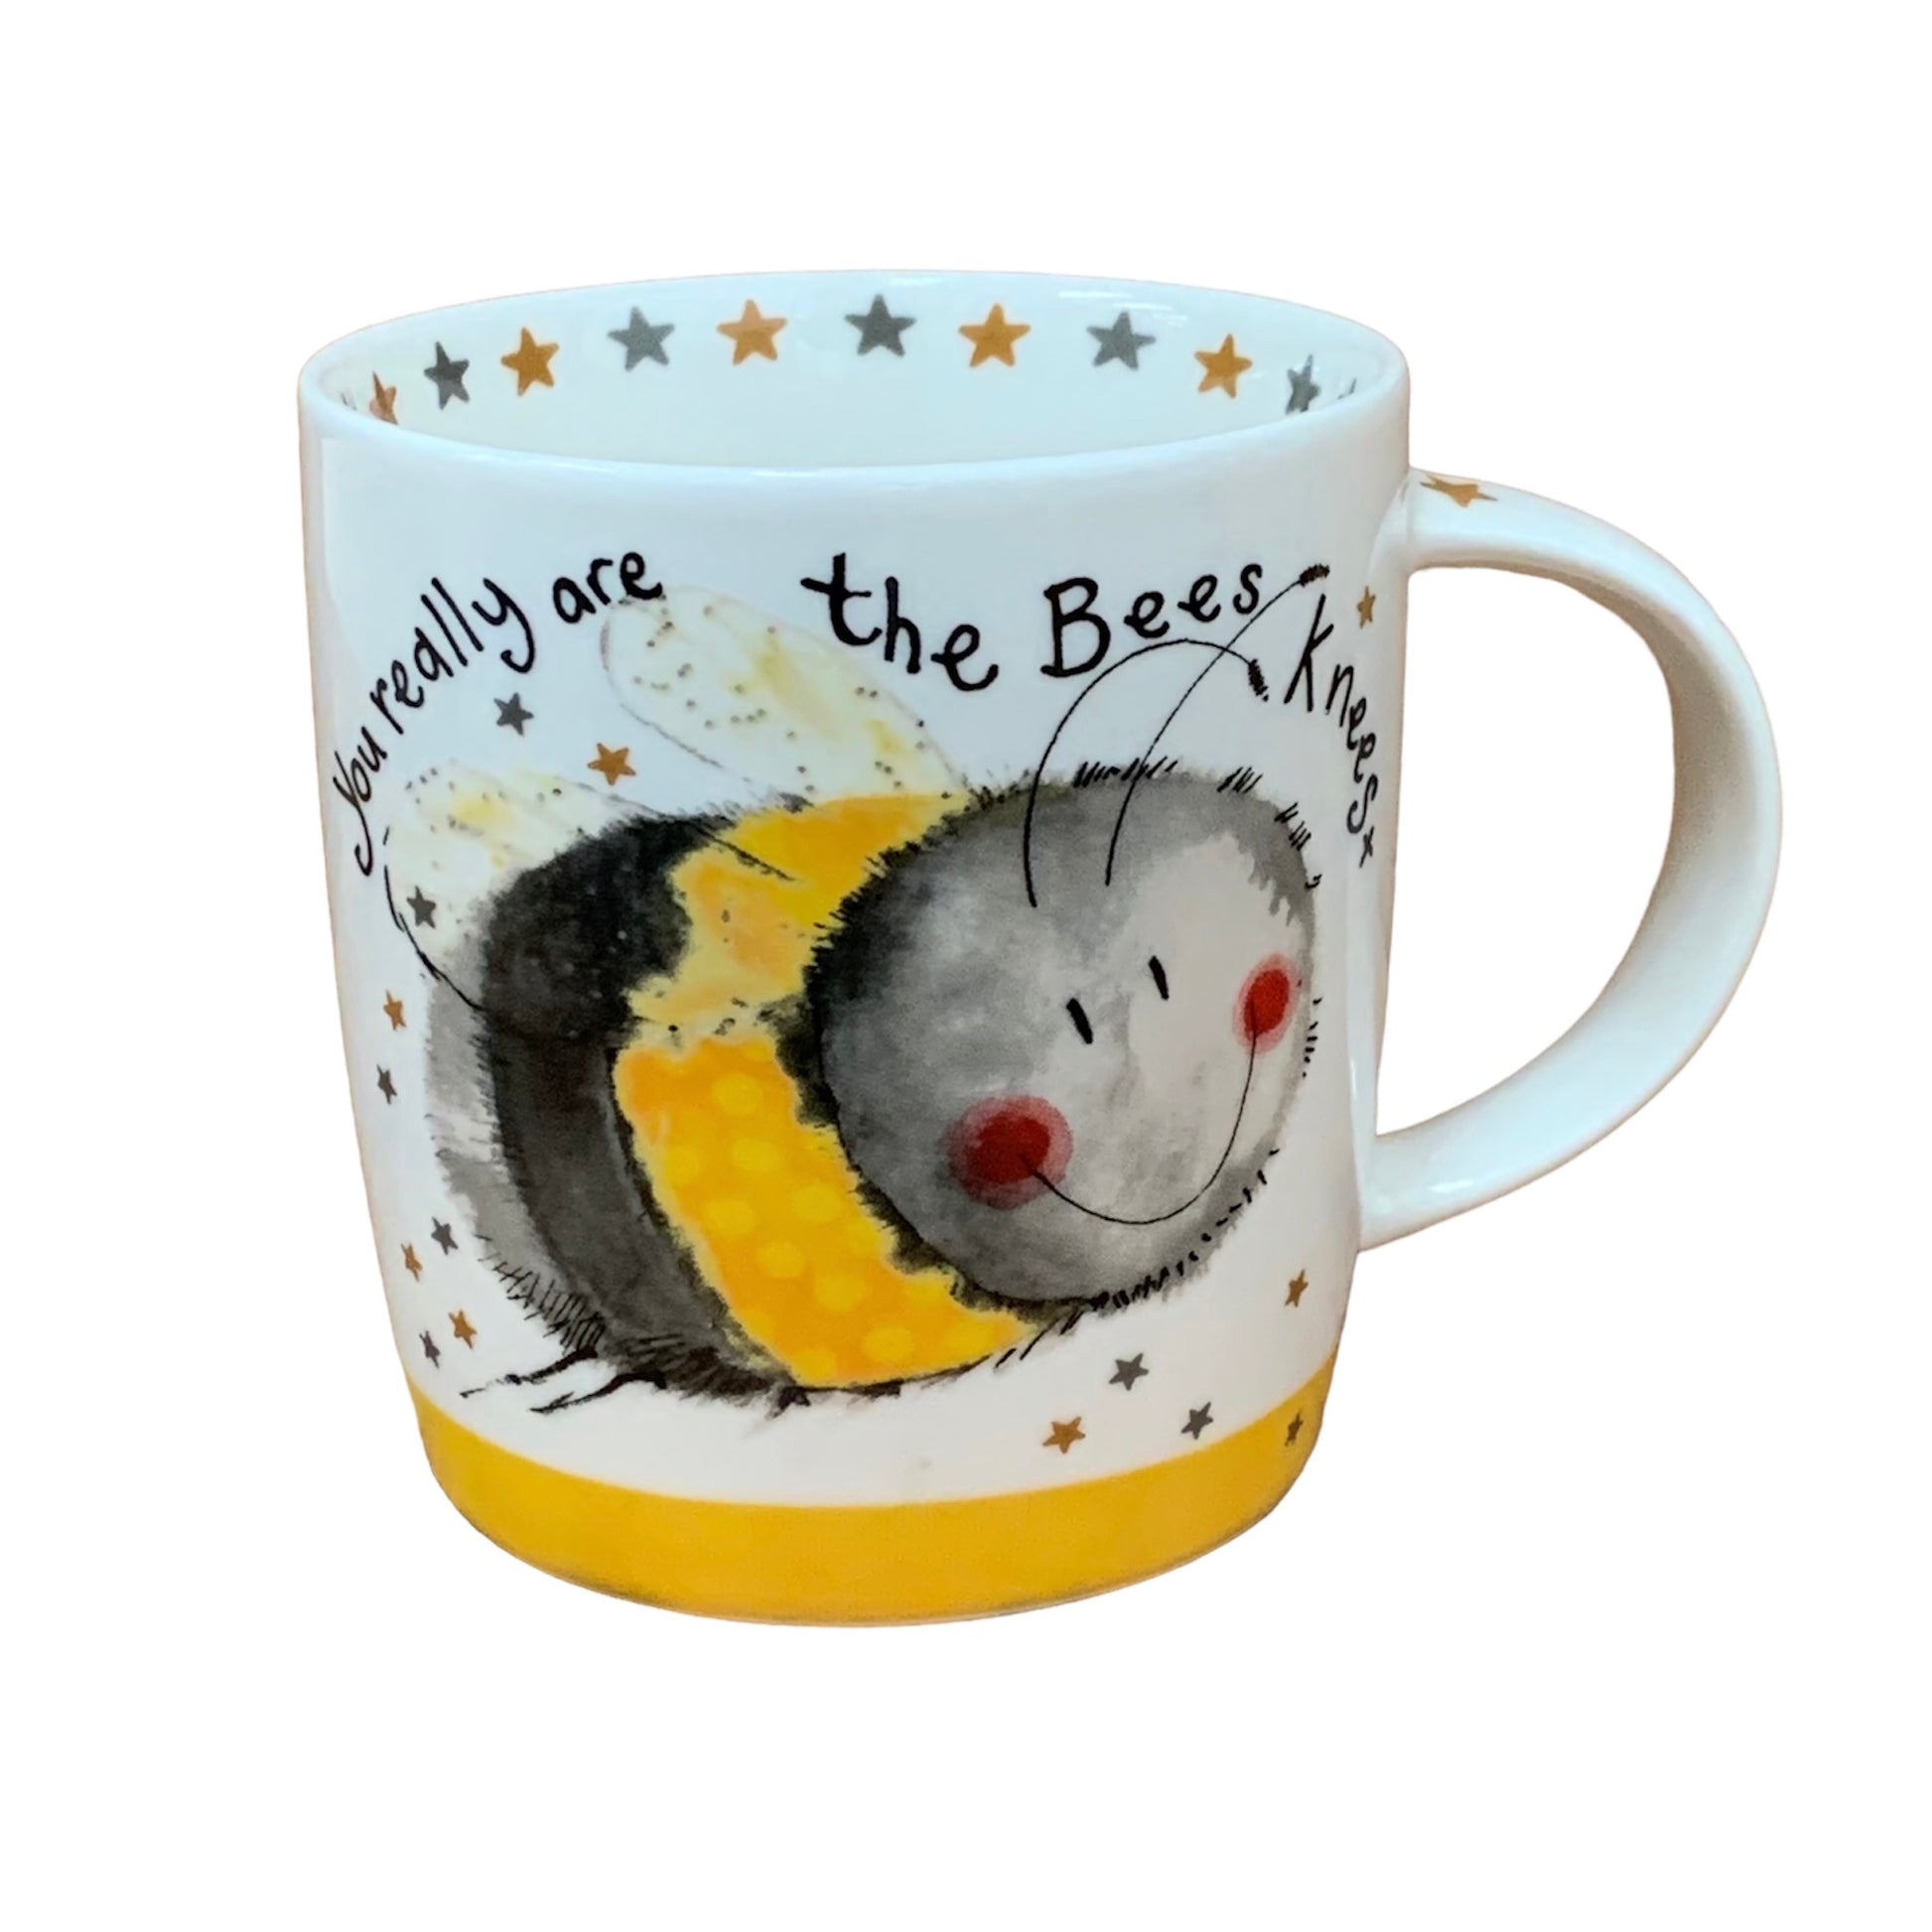 Alex Clark mug is illustrated with a beautiful Happy Bee